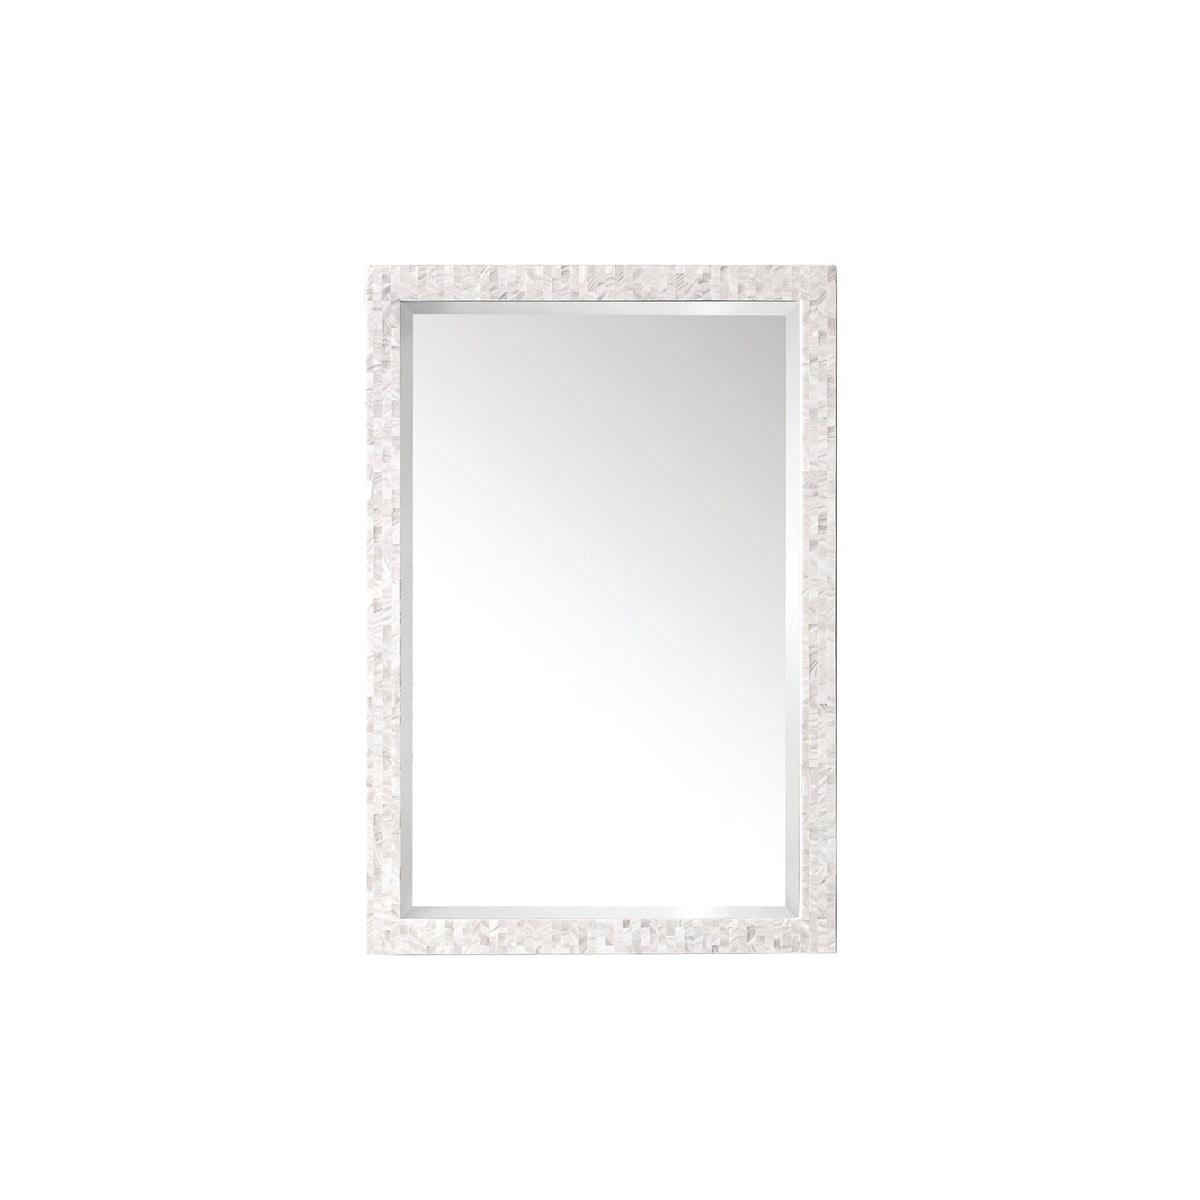 26" Callie Mirror, White Mother of Pearl